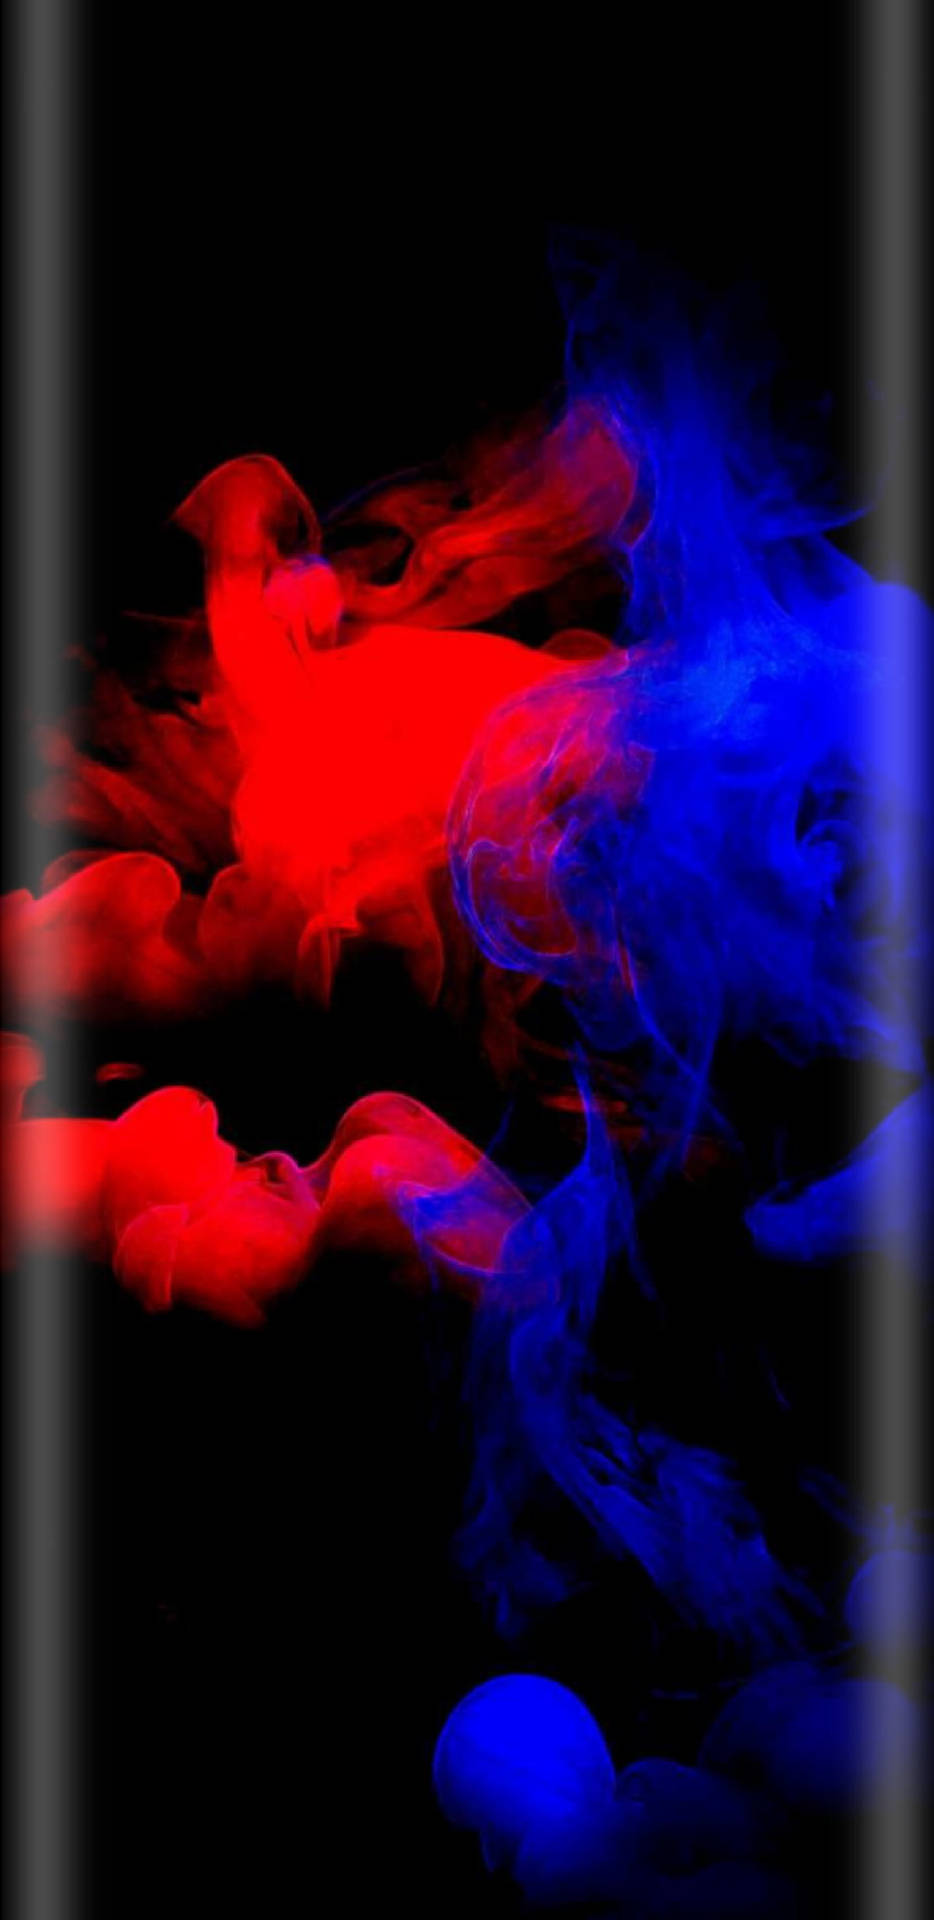 Blue And Red Smoke On Samsung Full Hd Background